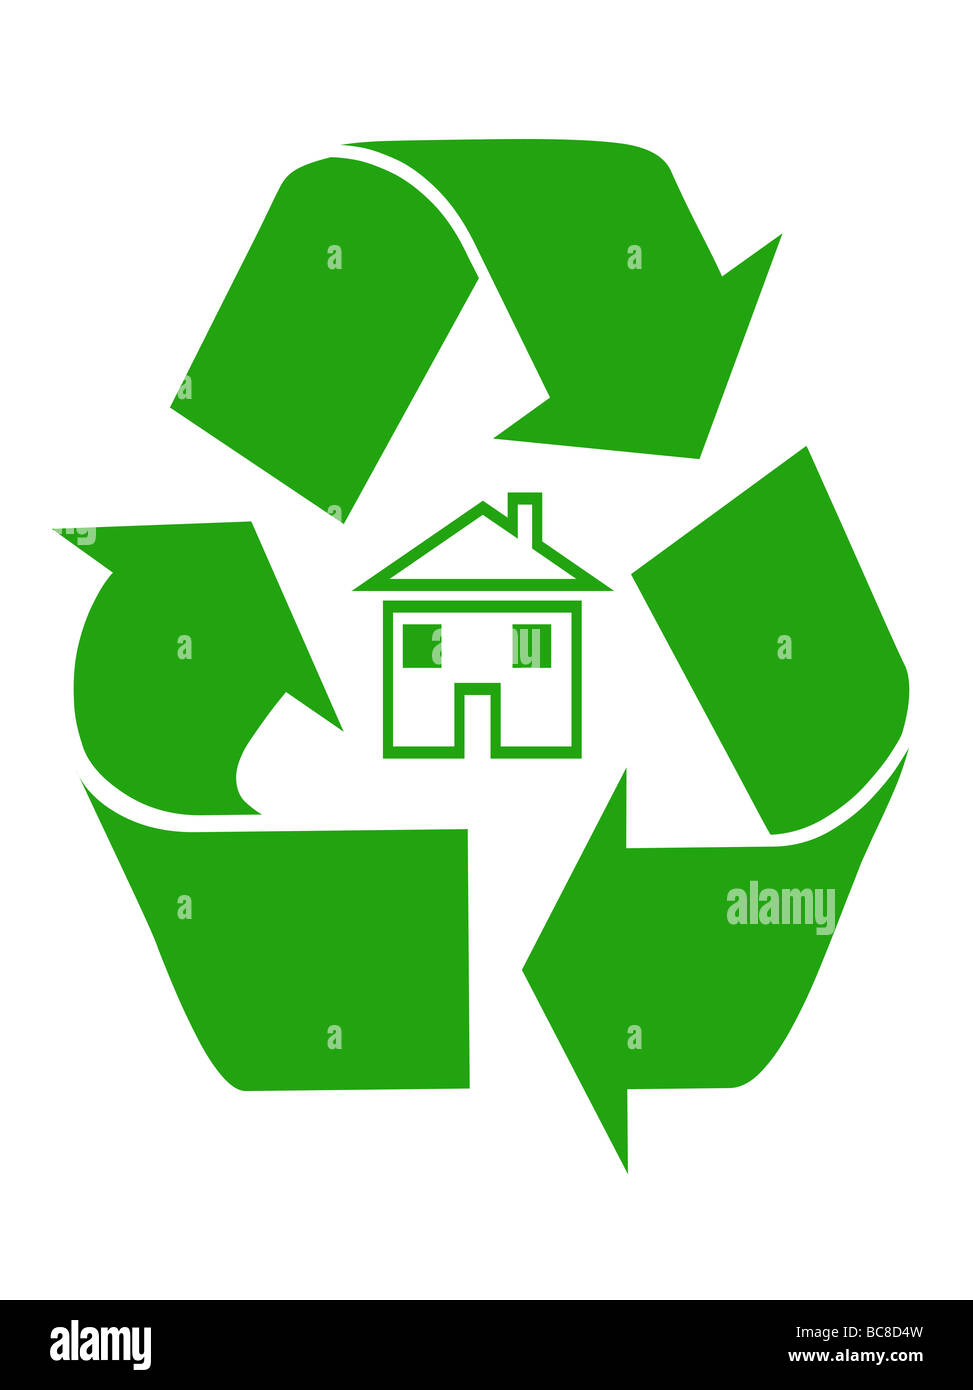 Green domestic house recycling symbol isolated on white background Stock Photo